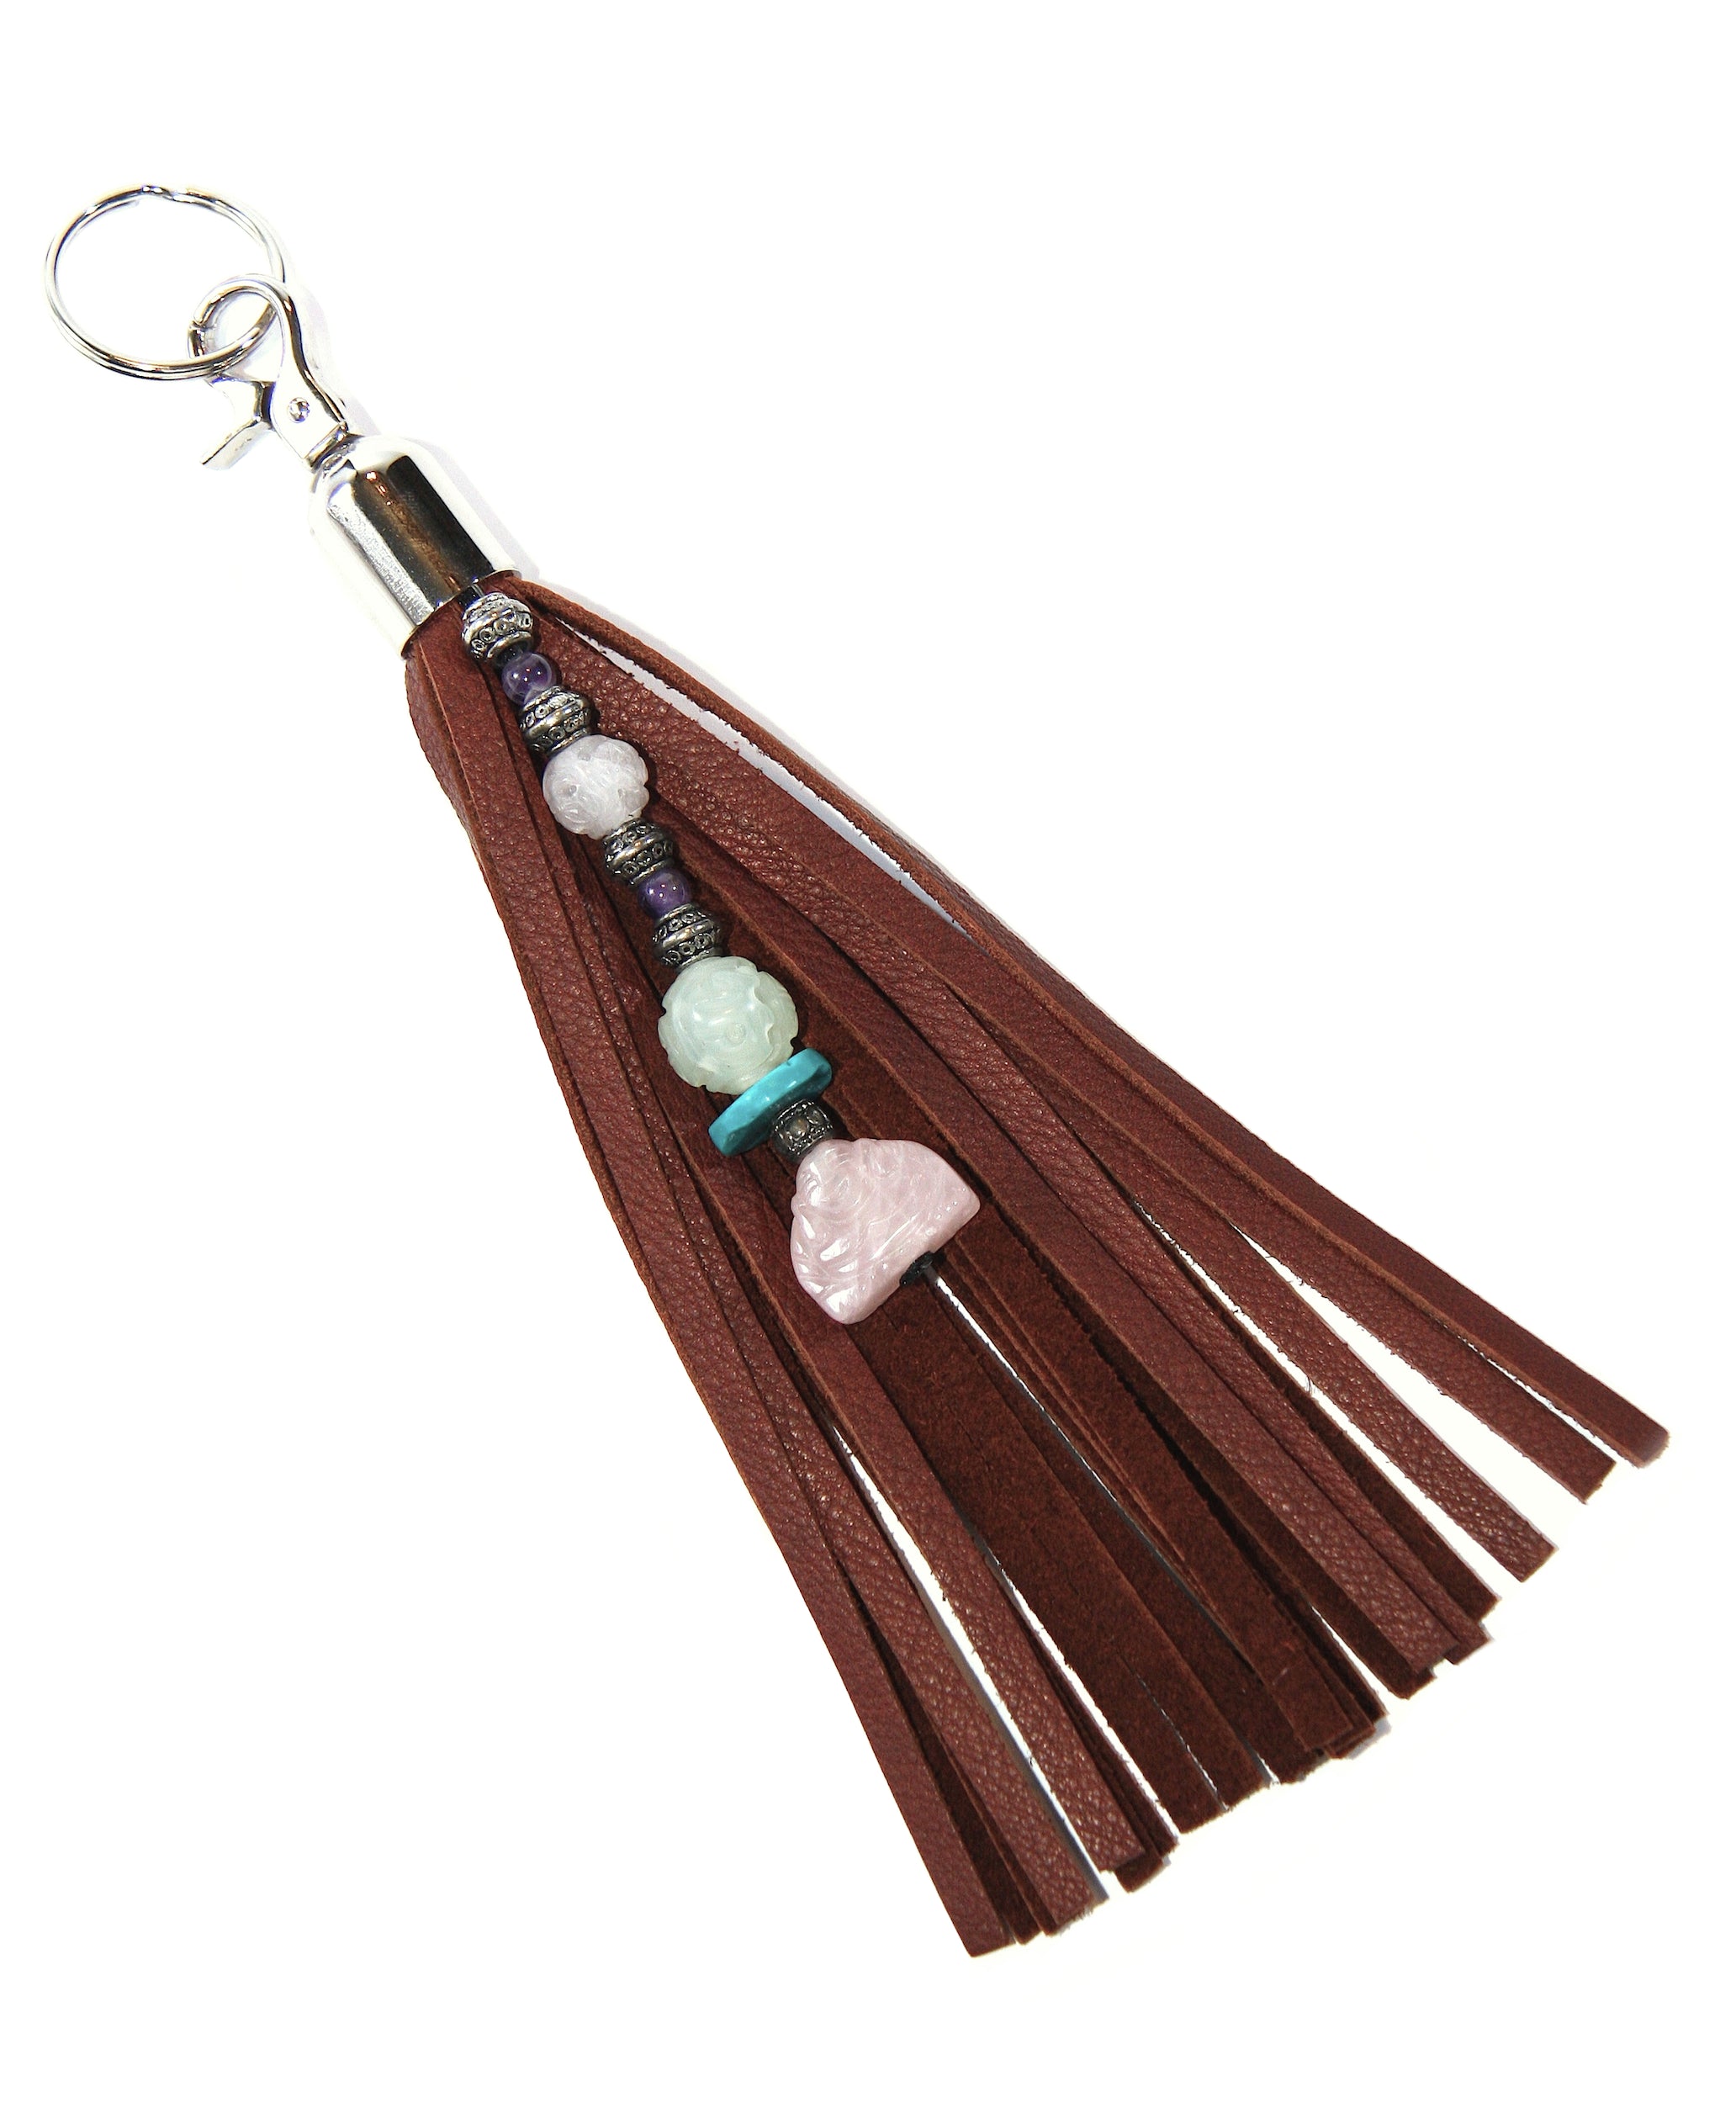 Bag Charm With Double Tassel for Purses & Totes Faux Suede Leather - Etsy |  Diy leather tassel, Diy leather bag, Purse charms diy